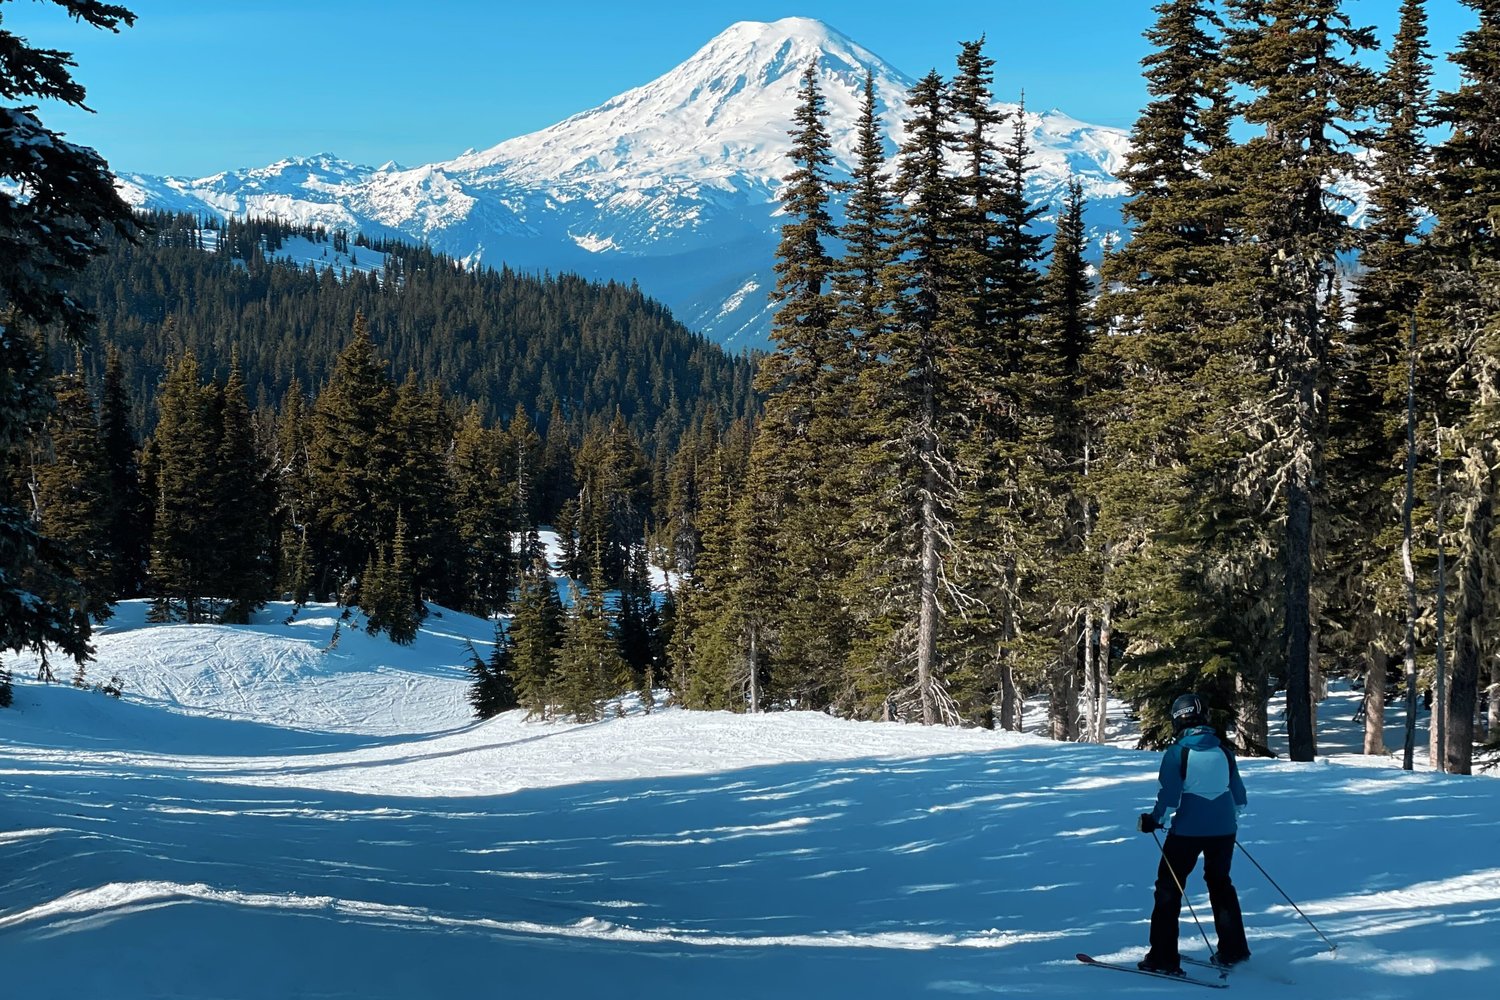 Mount Rainier sets the backdrop as a skier rides at White Pass on Sunday.